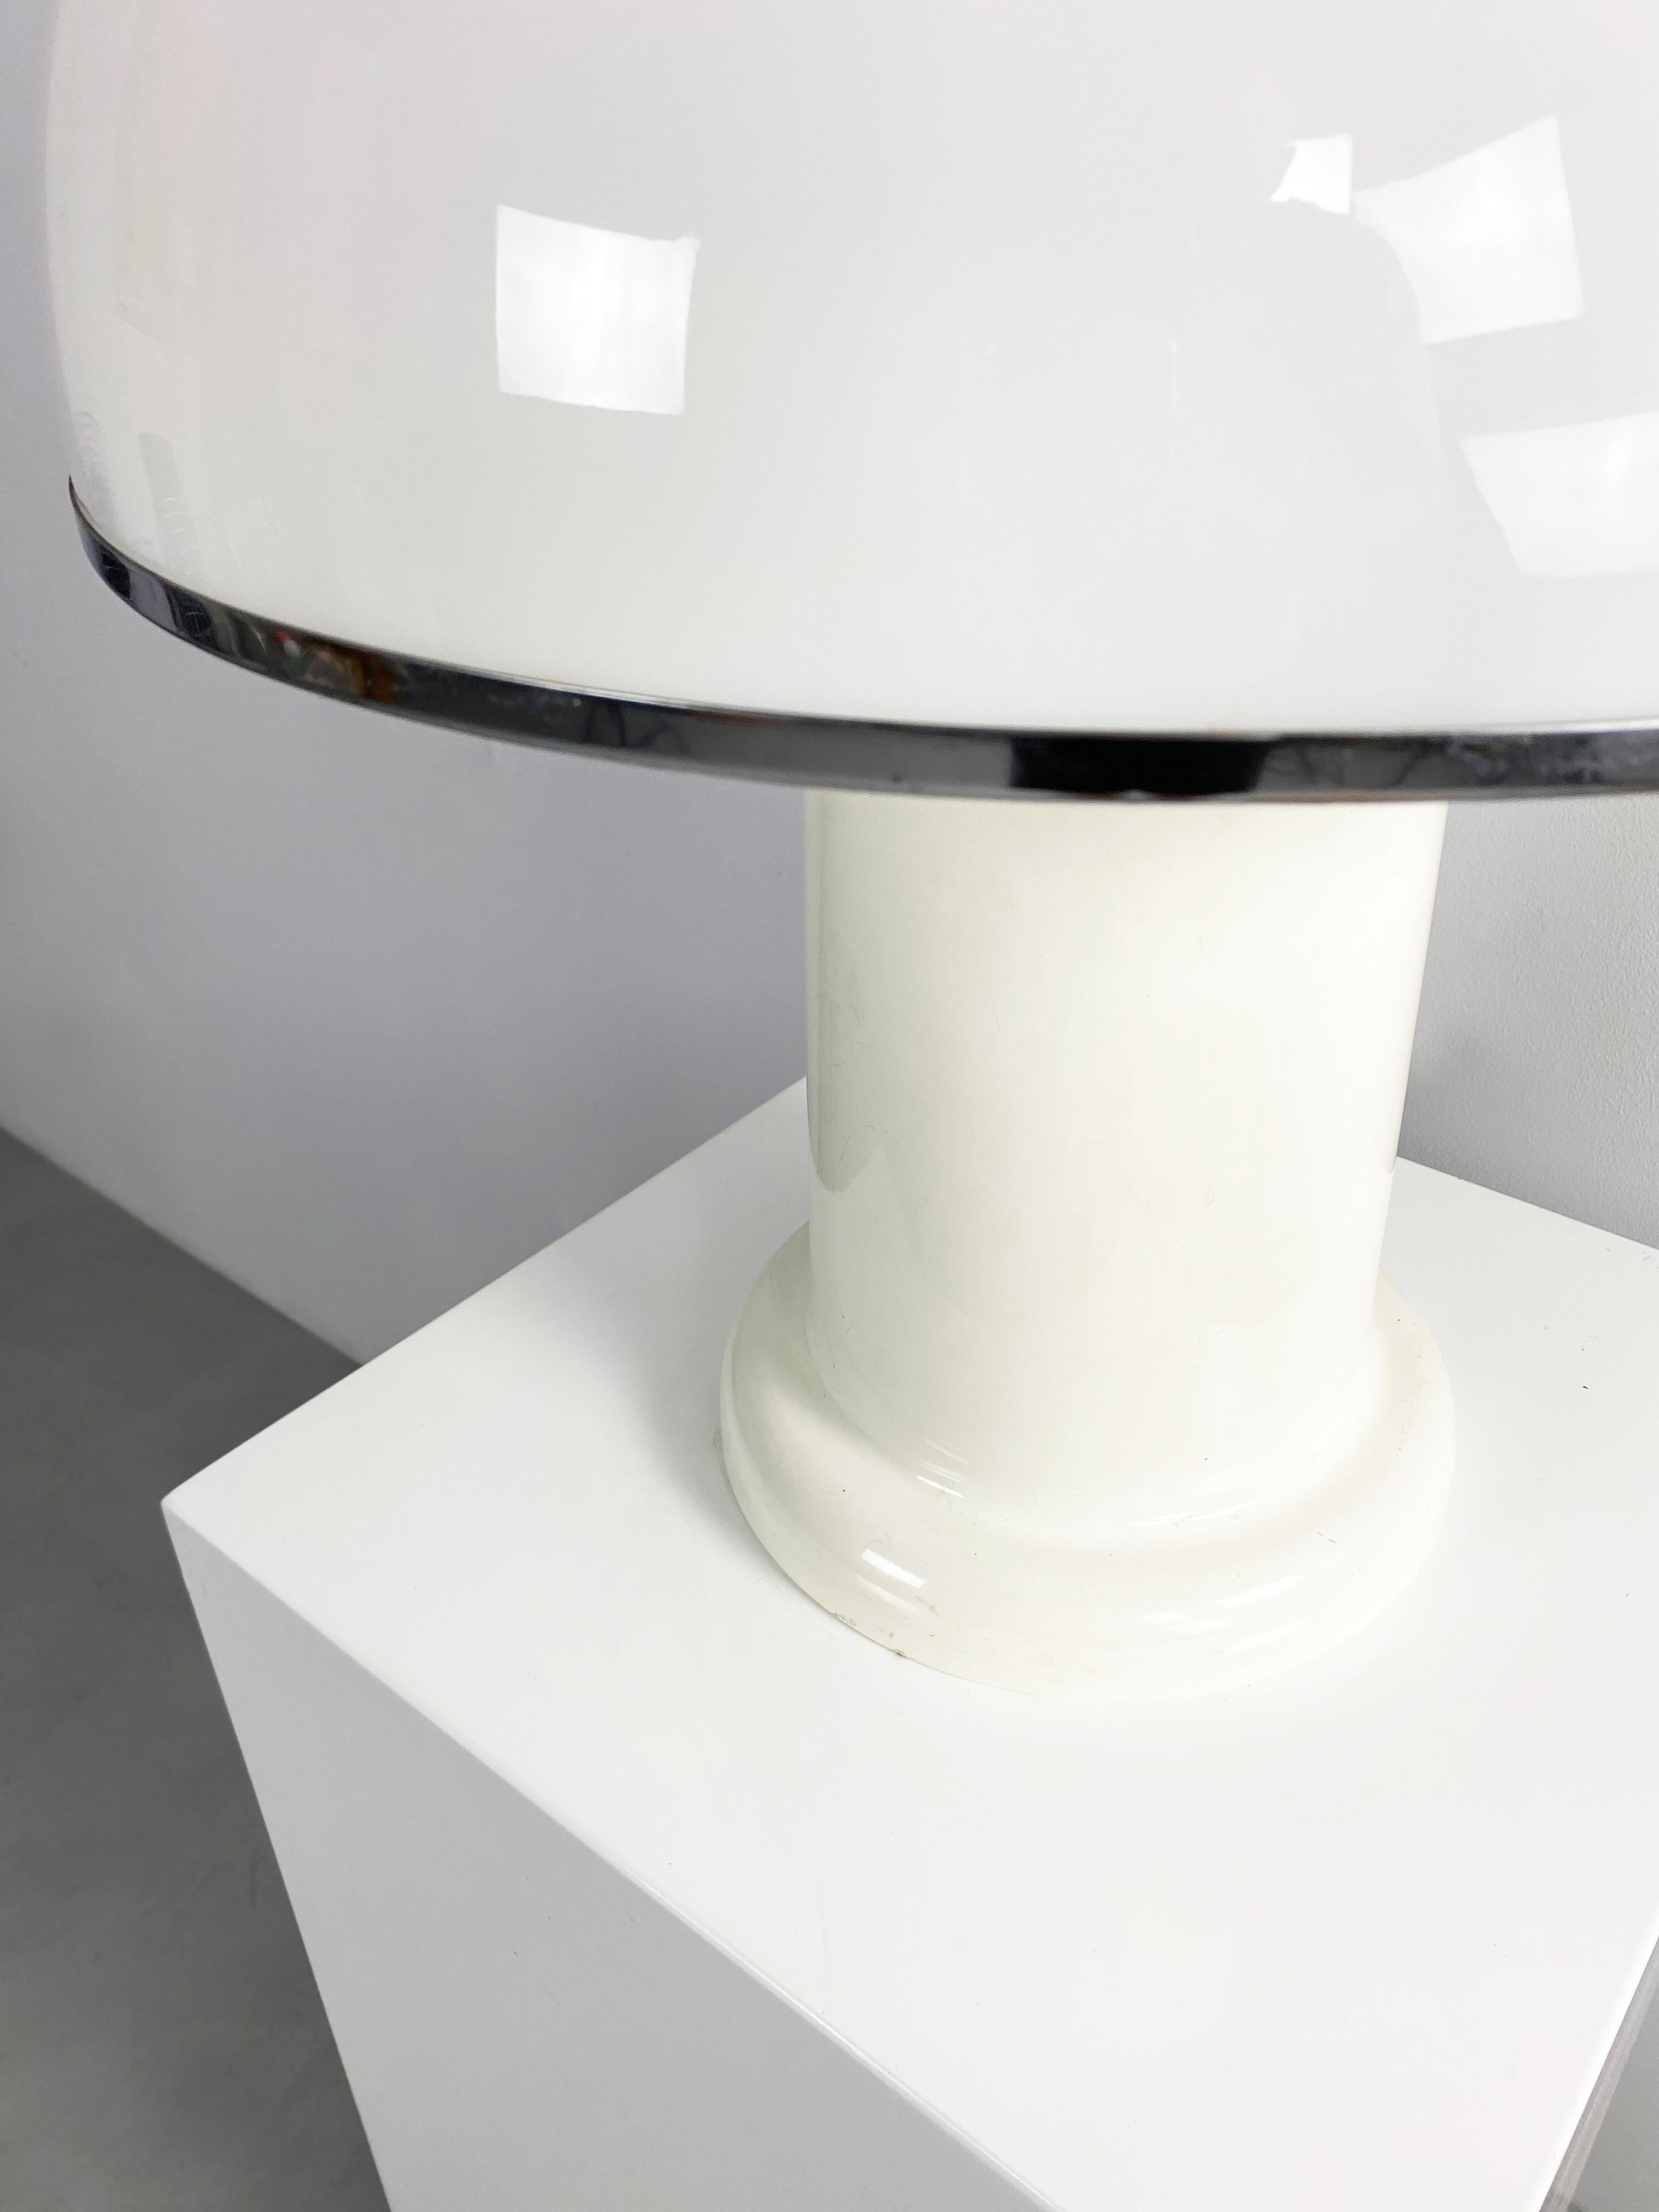 Space Age Large Plexiglass Mushroom Table Lamp by Groupe Habitat, France, c.1970 For Sale